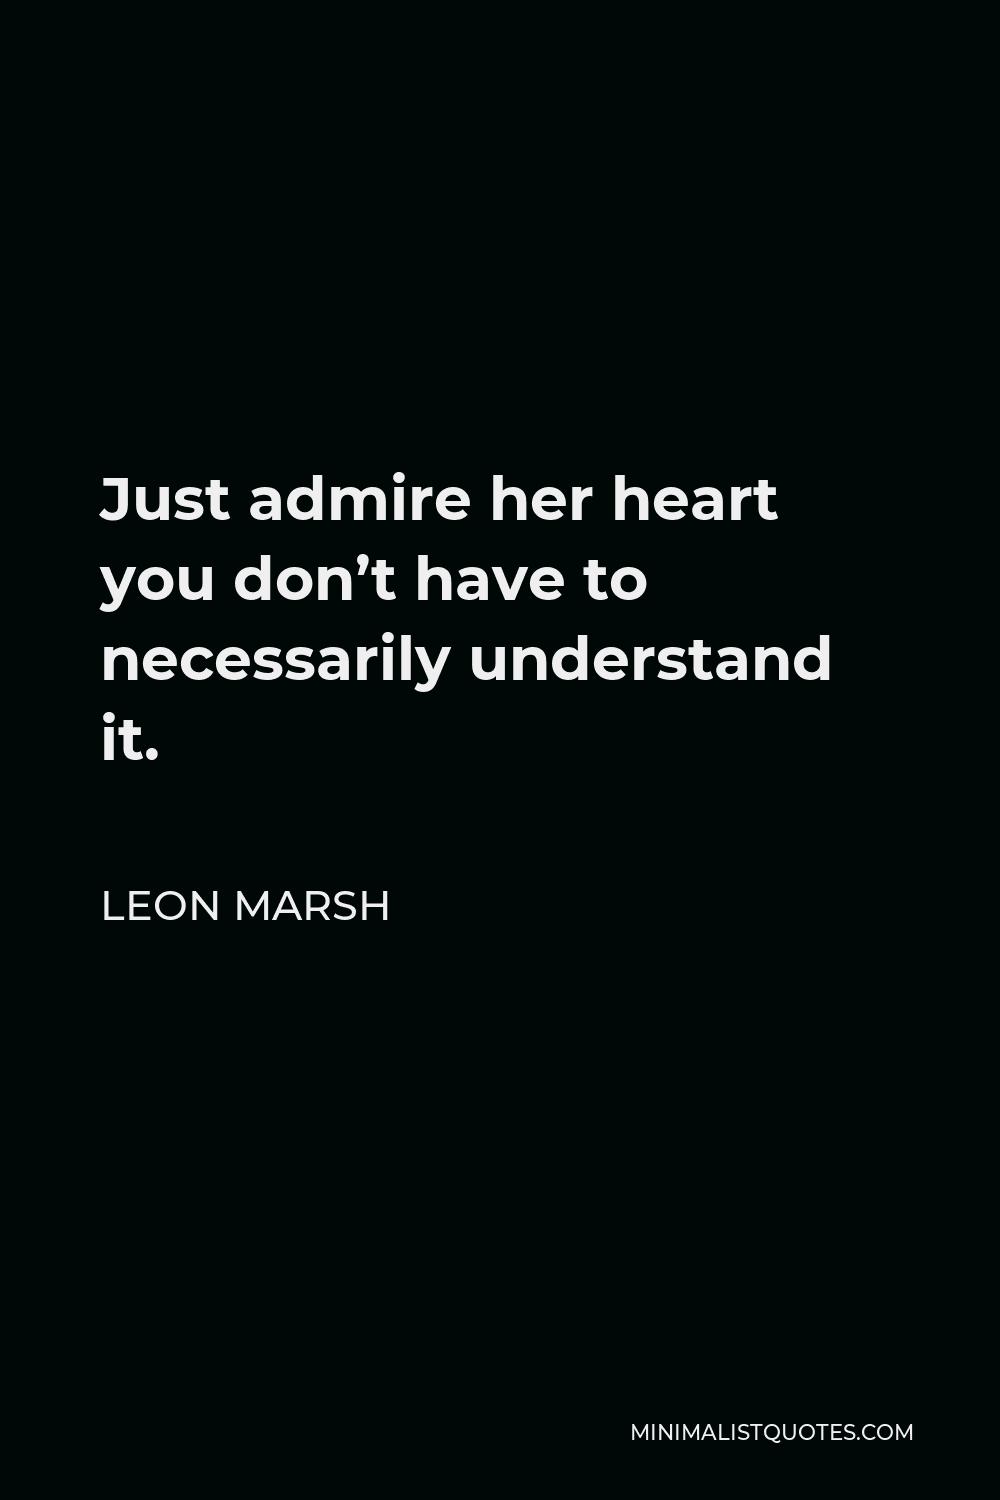 Leon Marsh Quote - Just admire her heart you don’t have to necessarily understand it.